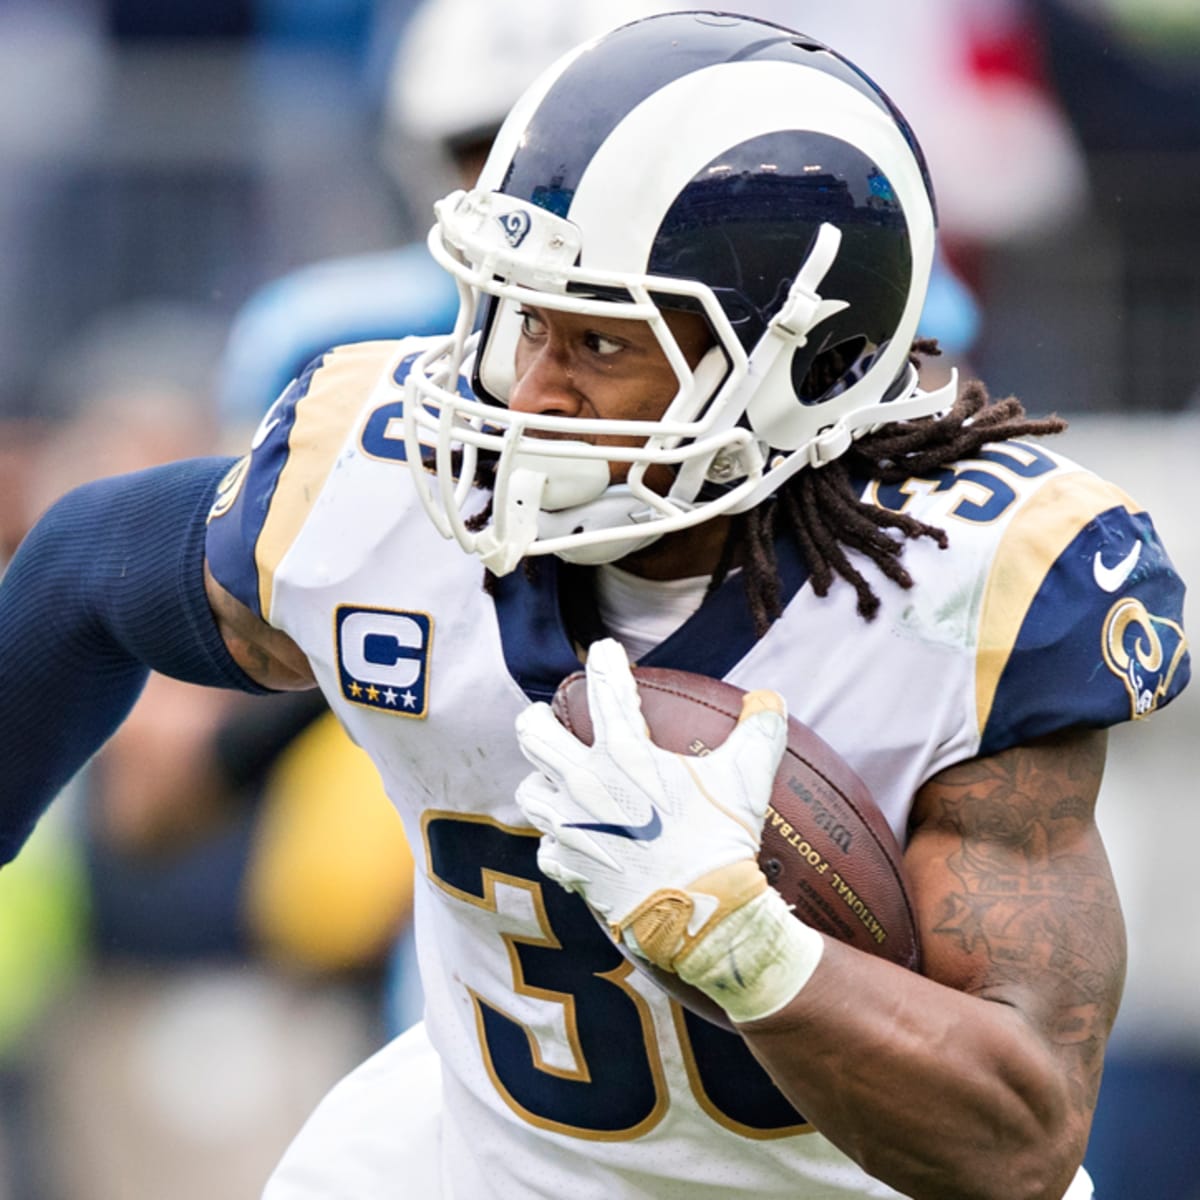 Gurley doesn't care about Super Bowl role